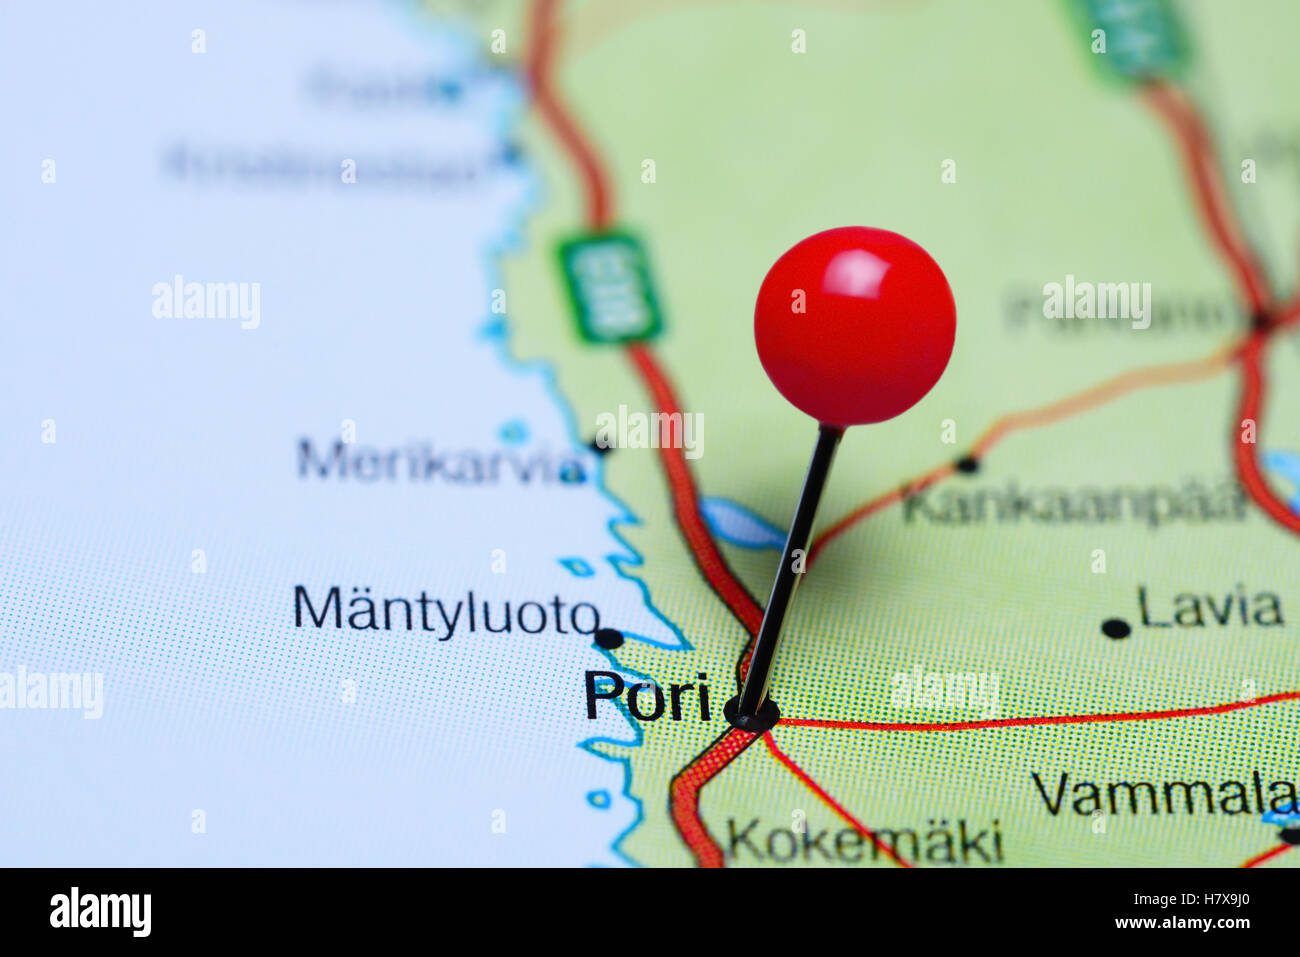 Pori pinned on a map of Finland Stock Photo